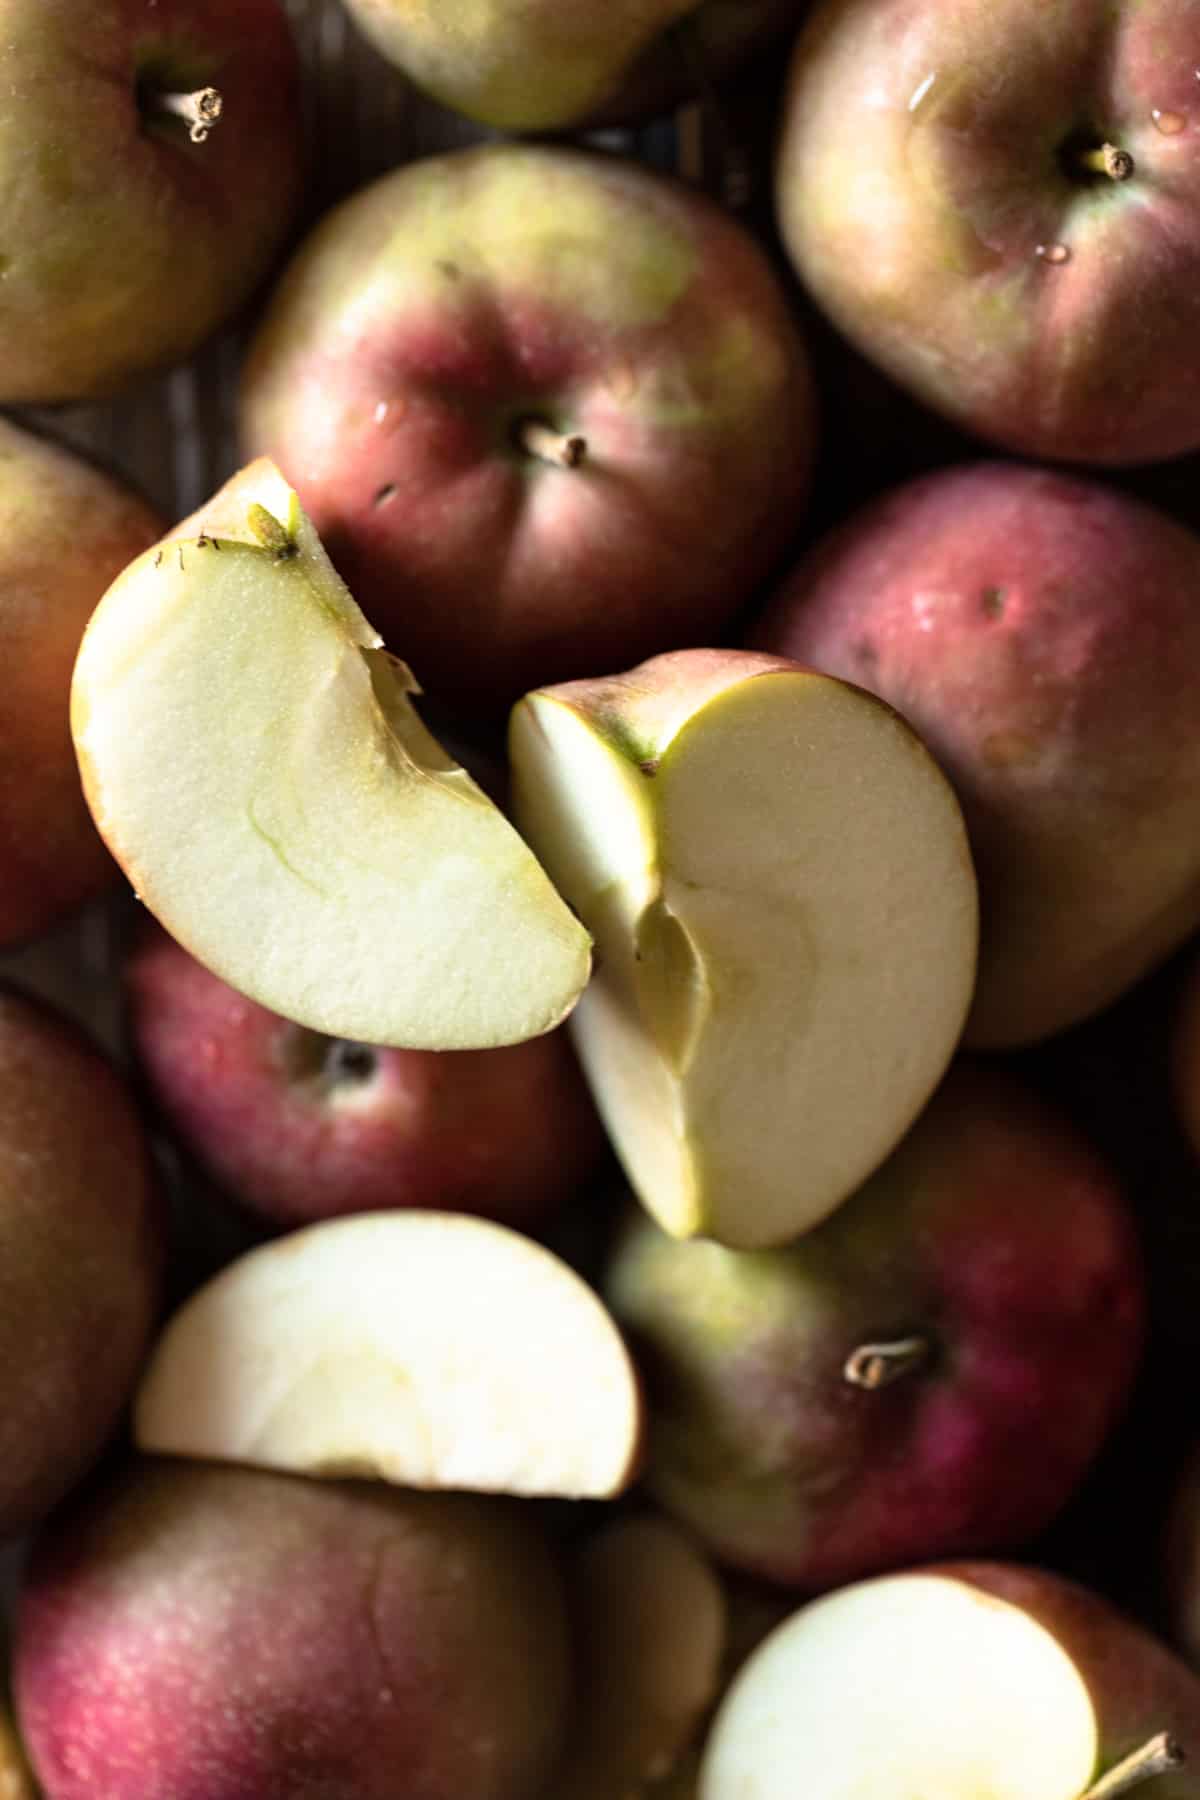 Closeup image of red McIntosh apples, some are cut into quarters and some are whole.